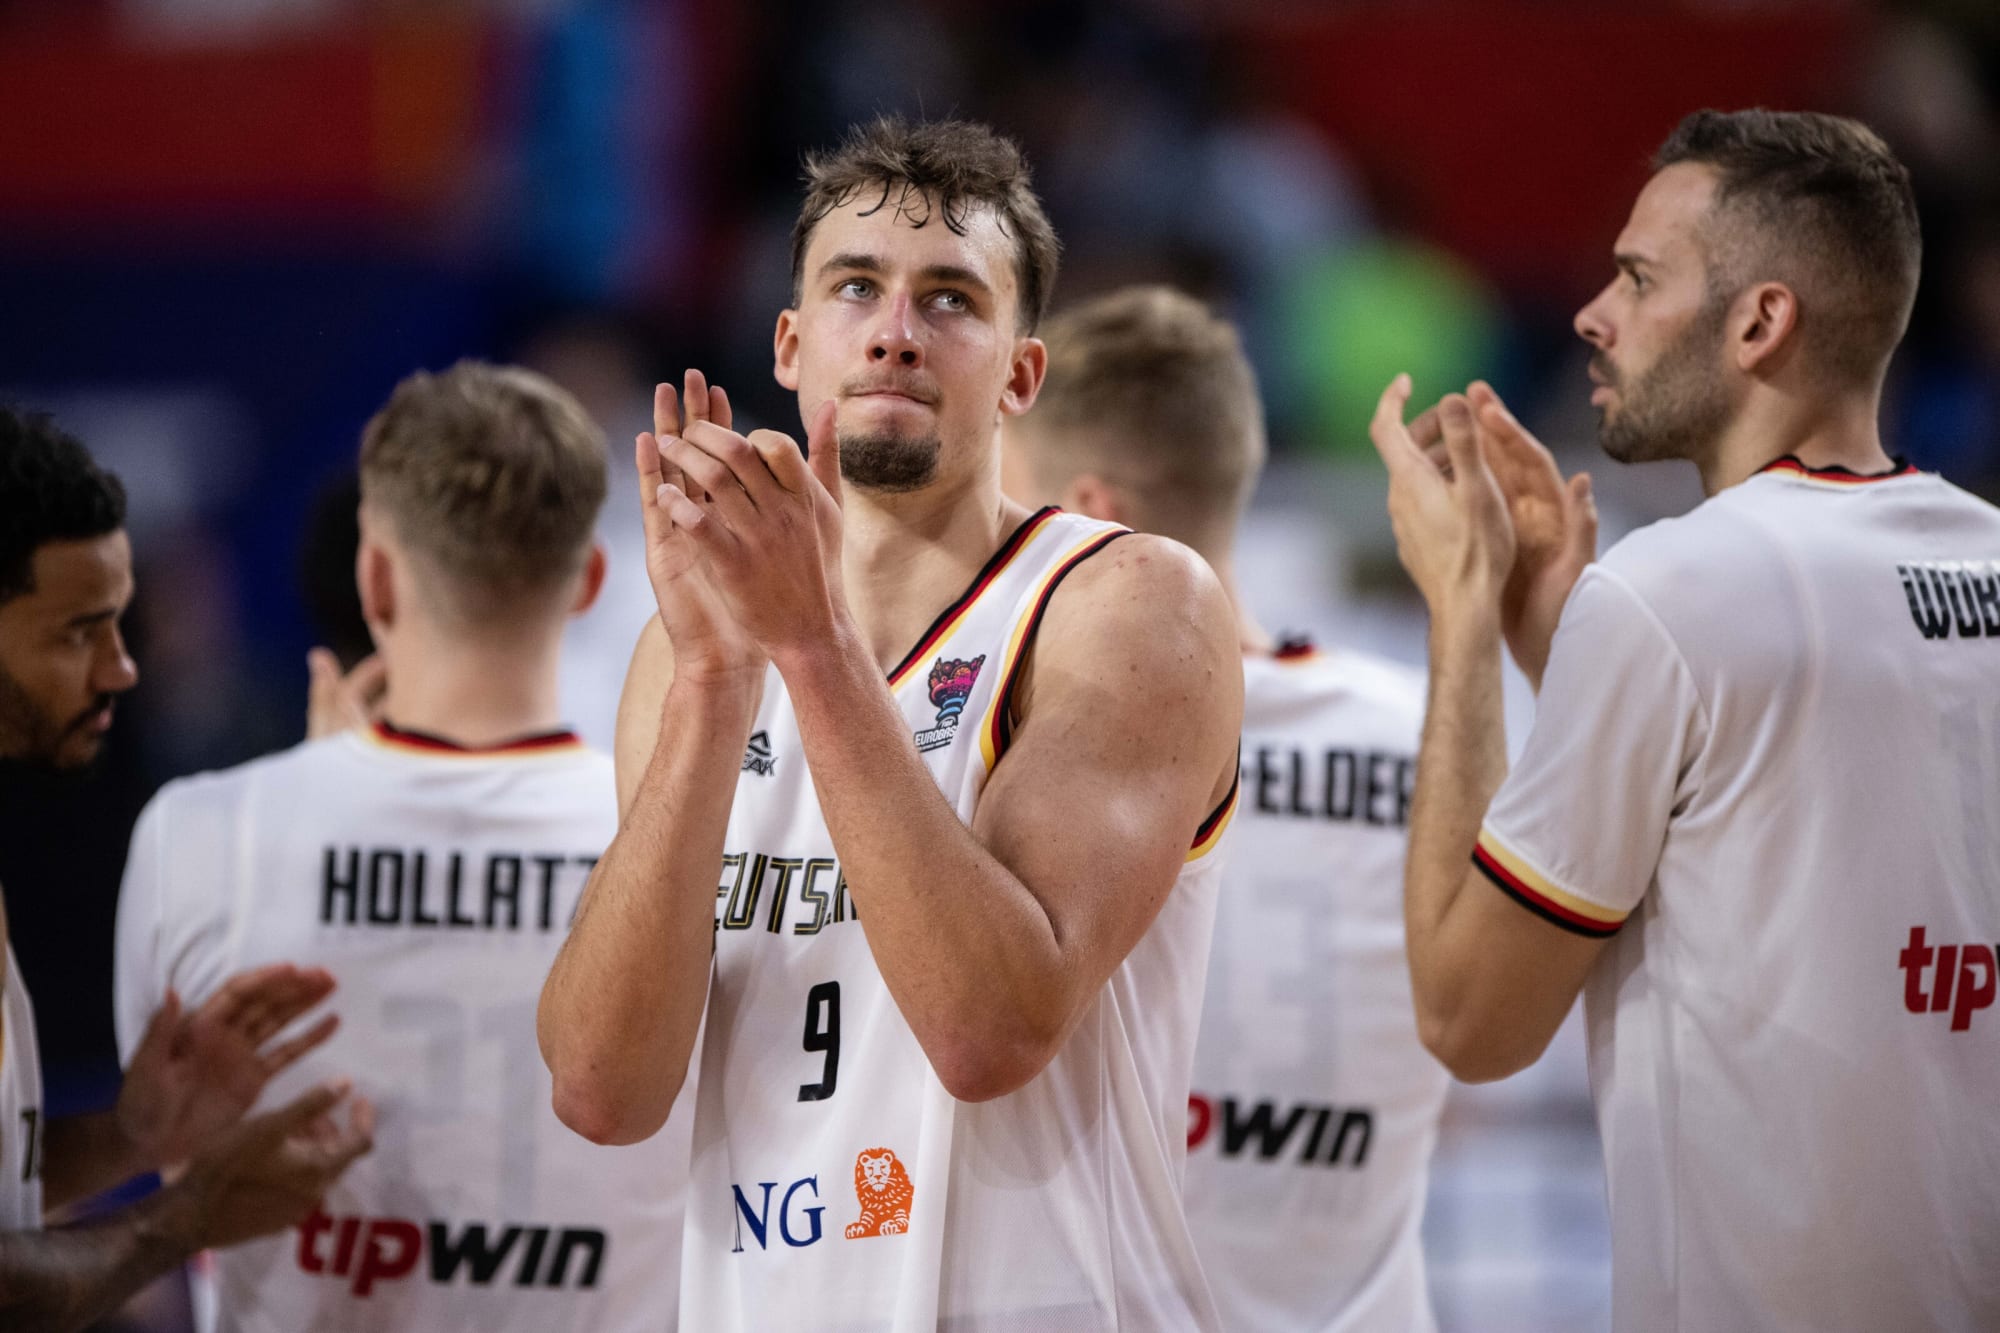 Germany's Franz Wagner eases back into his game after injury